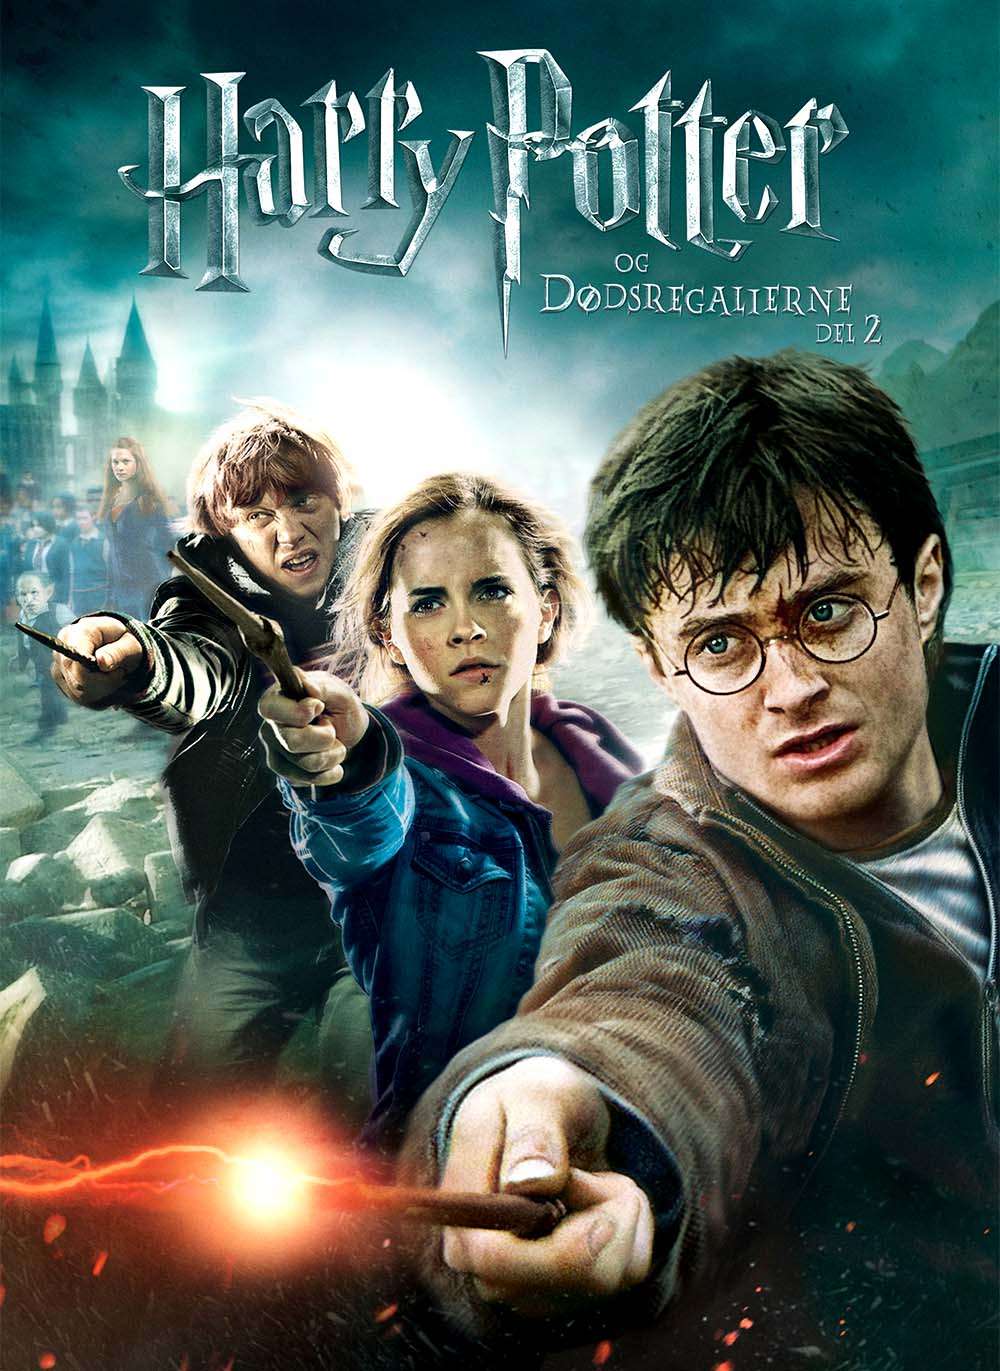 Harry Potter and the Deathly Hallows: Part 2 (2011) Movie ...